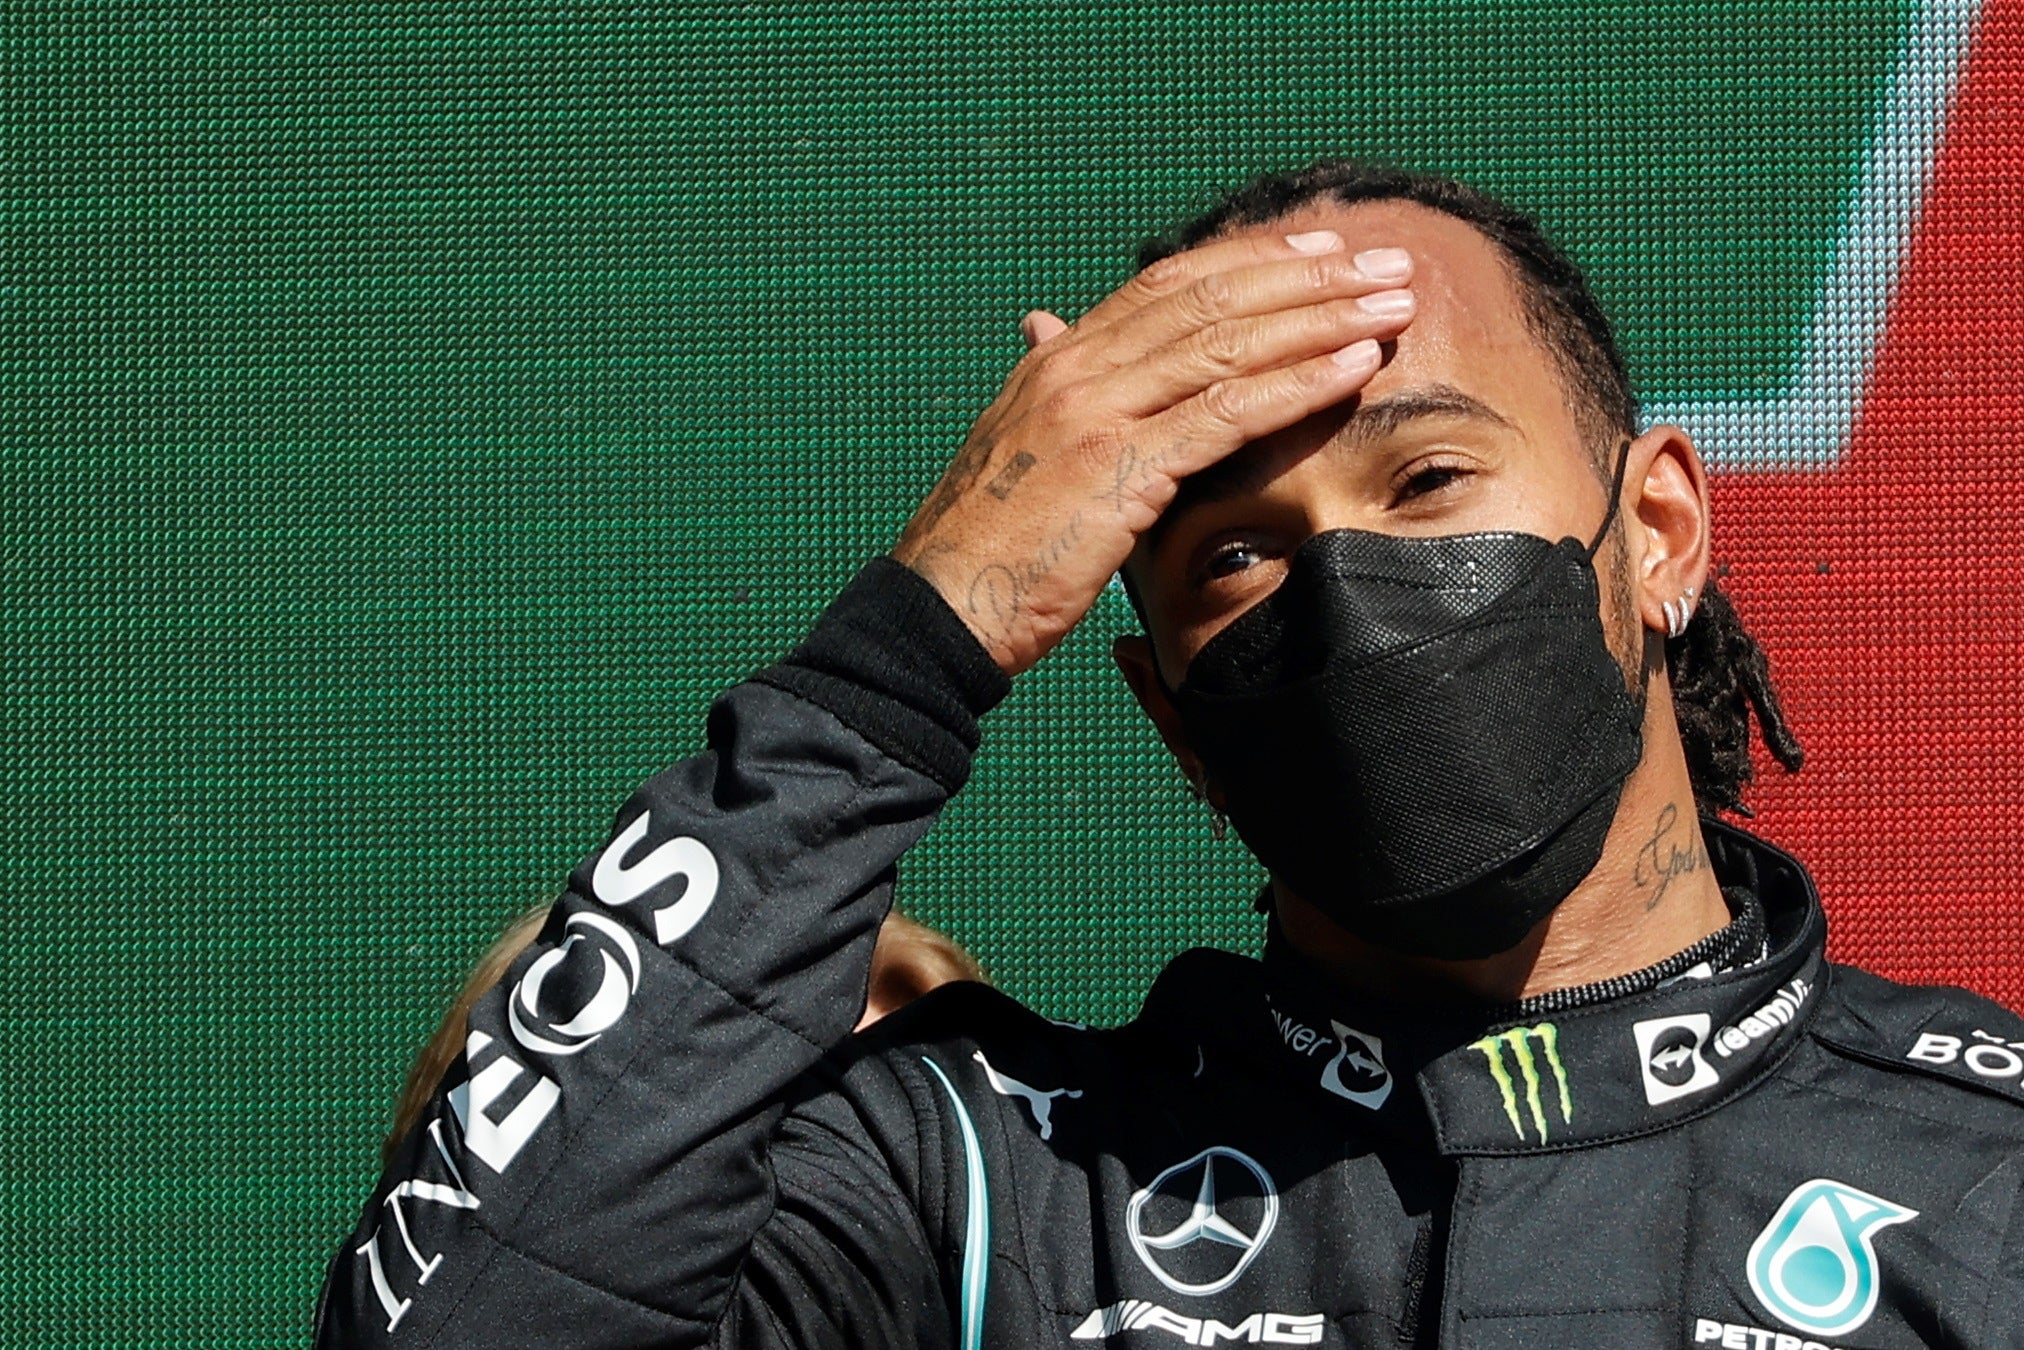 Hamilton slipped from 12 to 19 points behind Verstappen